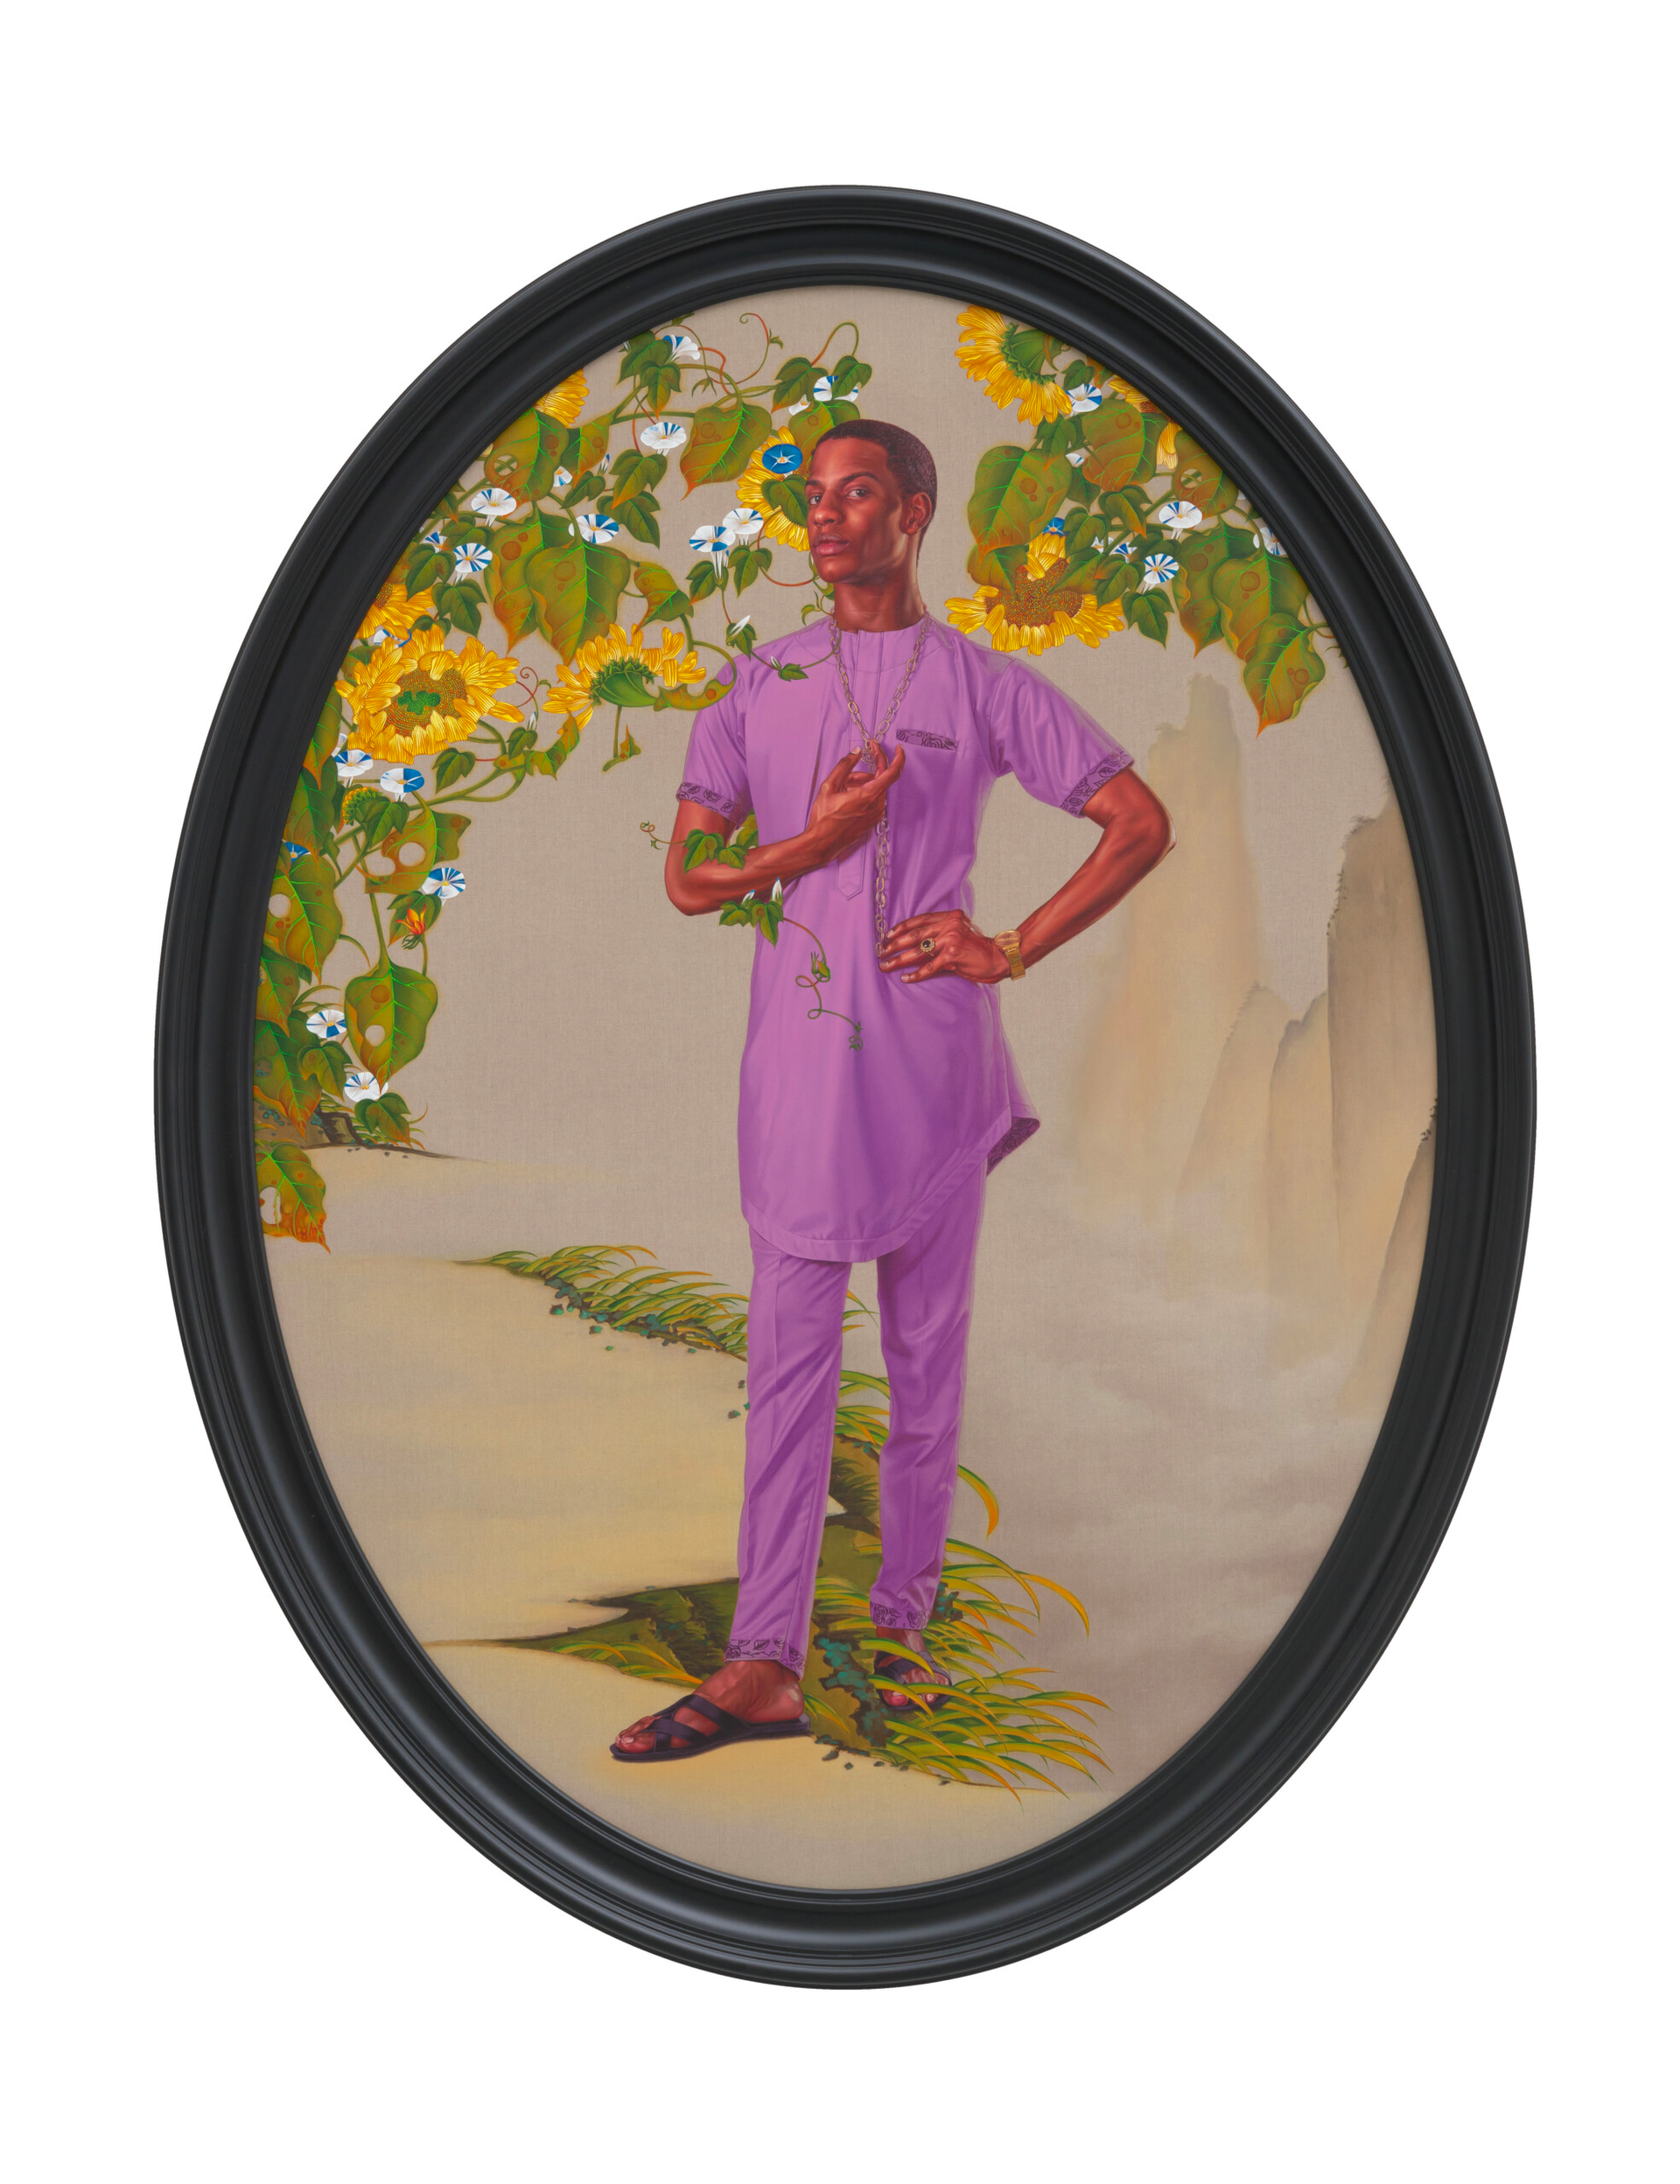 In a circular vignette-style portrait, a tall and slender black man is depicted wearing traditional lavender Muslim clothing. He stands confidently with one foot extended outward, and his hand rests gracefully on his hip, while his other arm bends across his chest. The portrait is set outdoors, underneath a green tree adorned with yellow flowers, although the tree itself is intentionally cropped out of the composition.